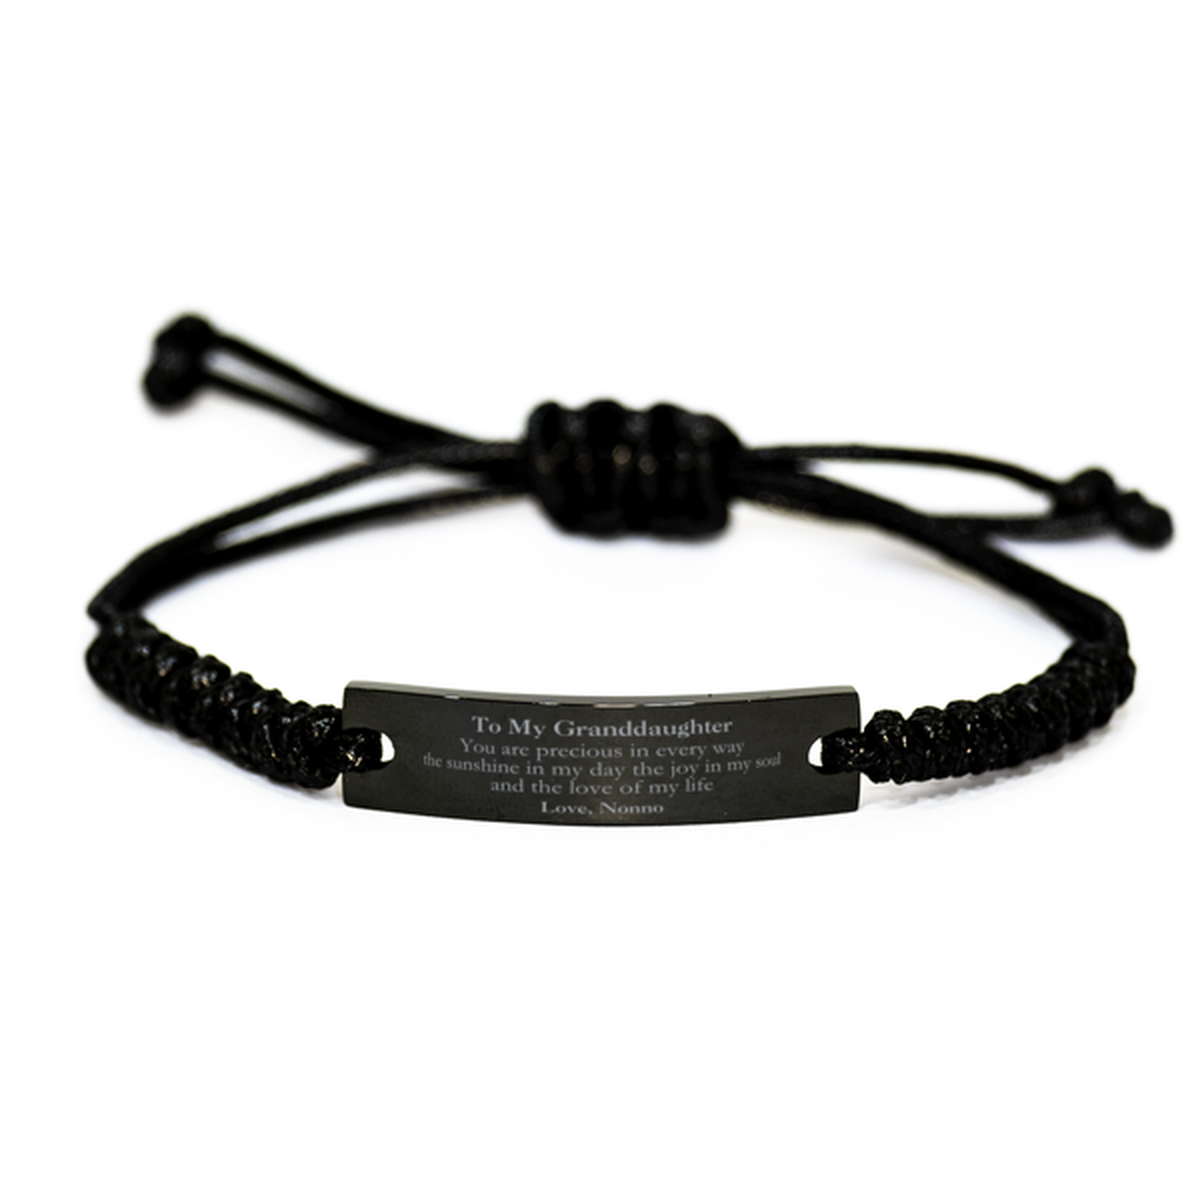 Graduation Gifts for Granddaughter Black Rope Bracelet Present from Nonno, Christmas Granddaughter Birthday Gifts Granddaughter You are precious in every way the sunshine in my day. Love, Nonno